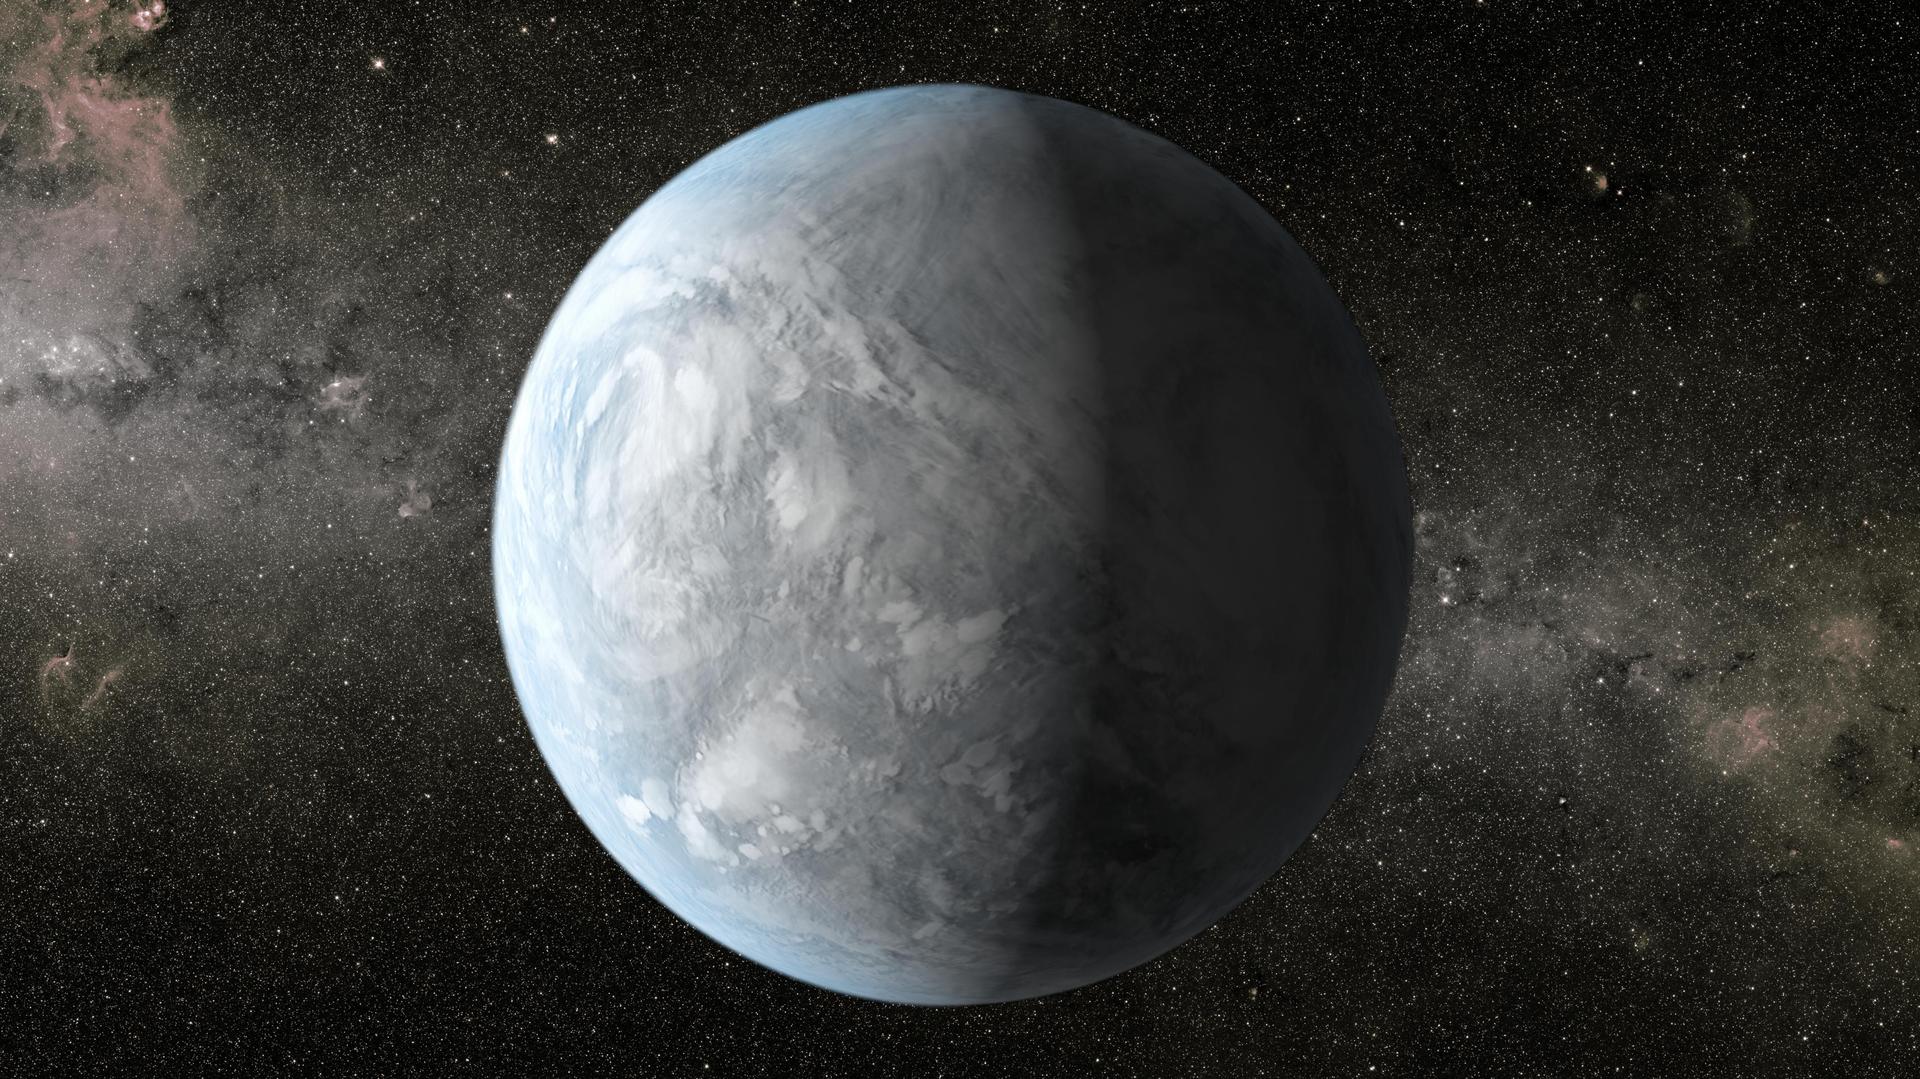 An artist’s conception of a “super Earth” exoplanet